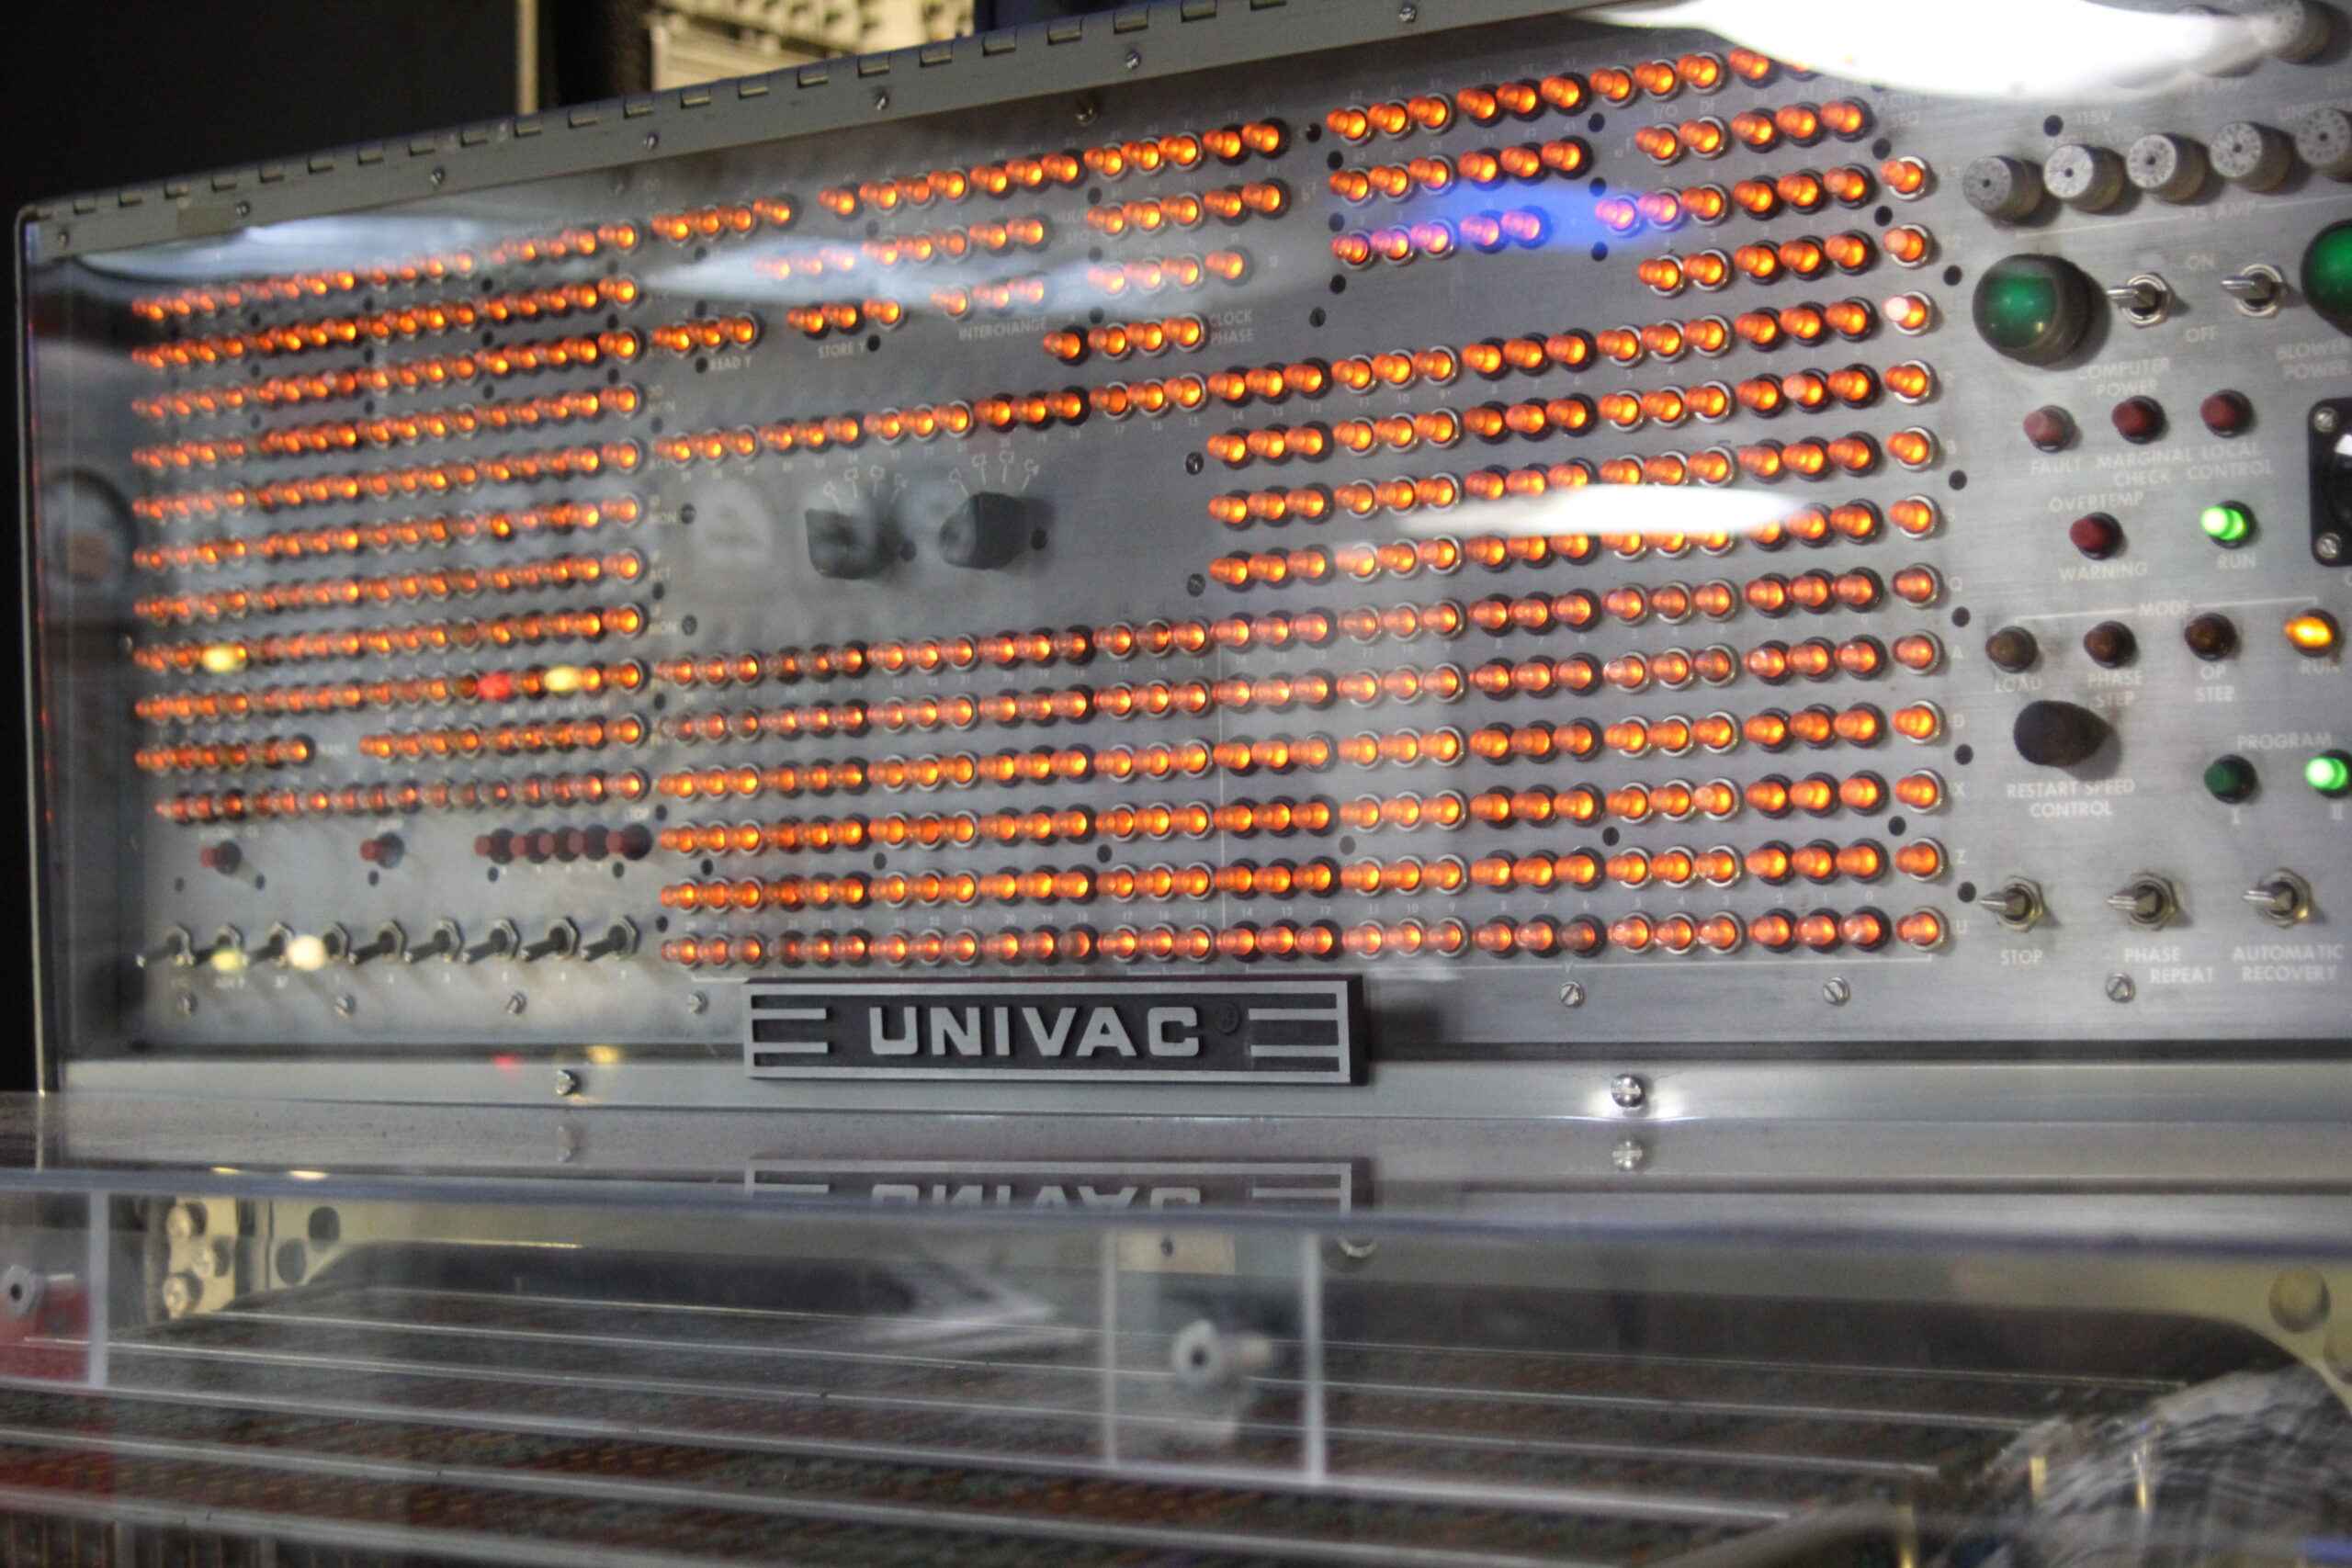 Midway Aircraft Carrier, San Diego, CA - UNIVAC